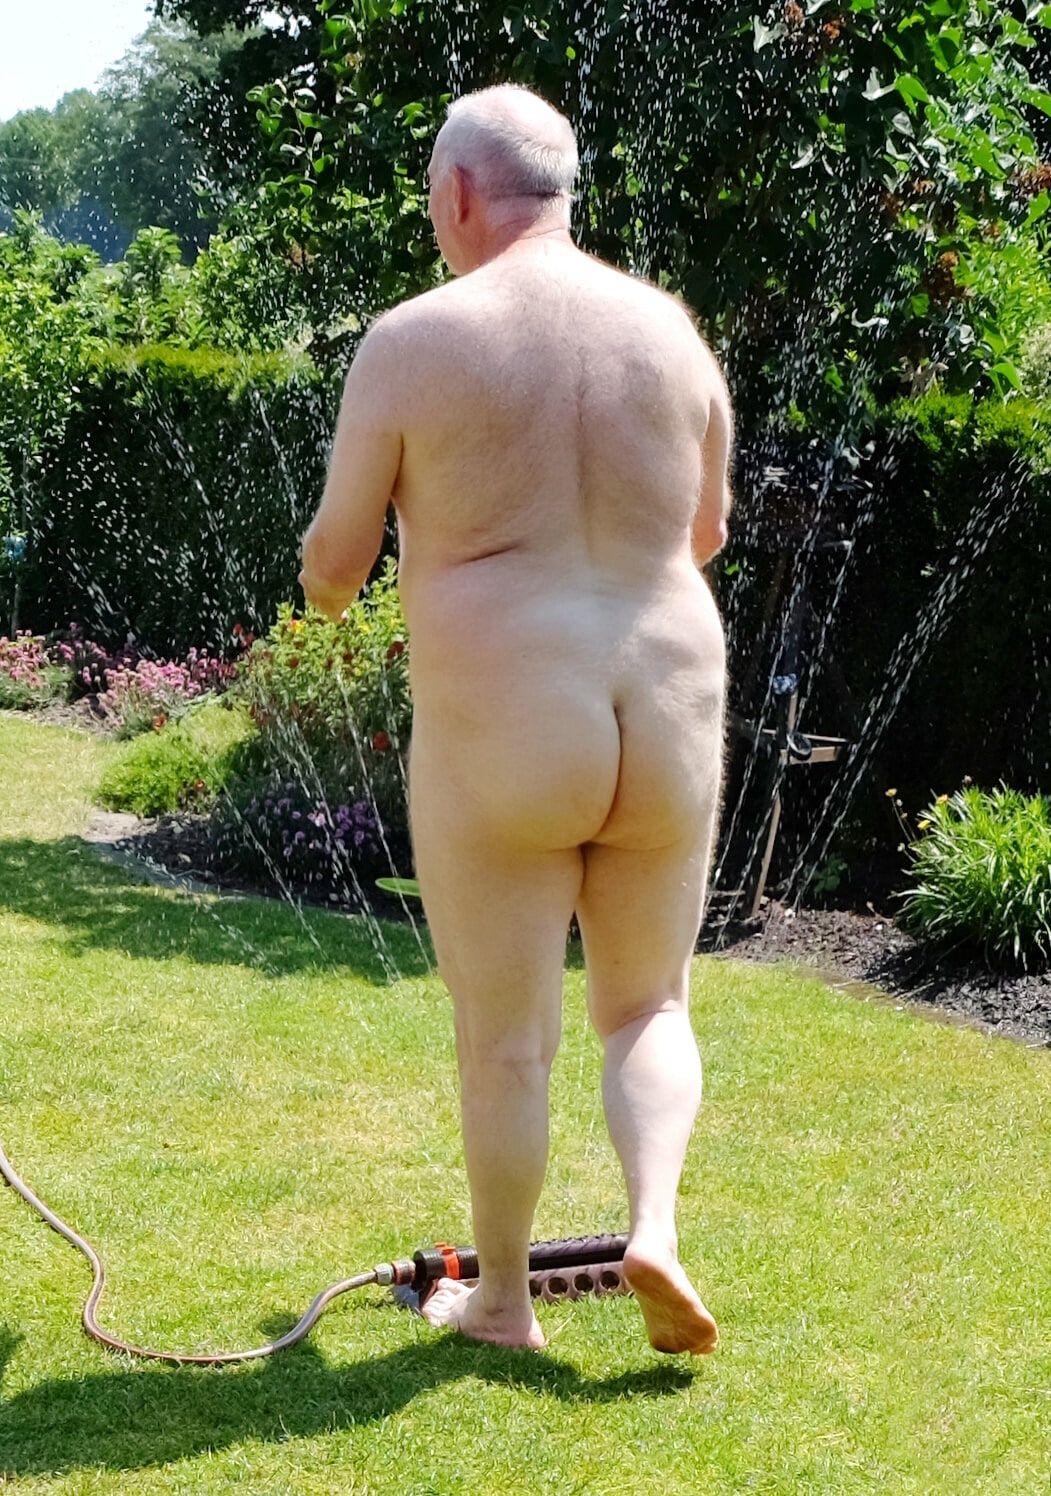 Naked Daddy on the grass